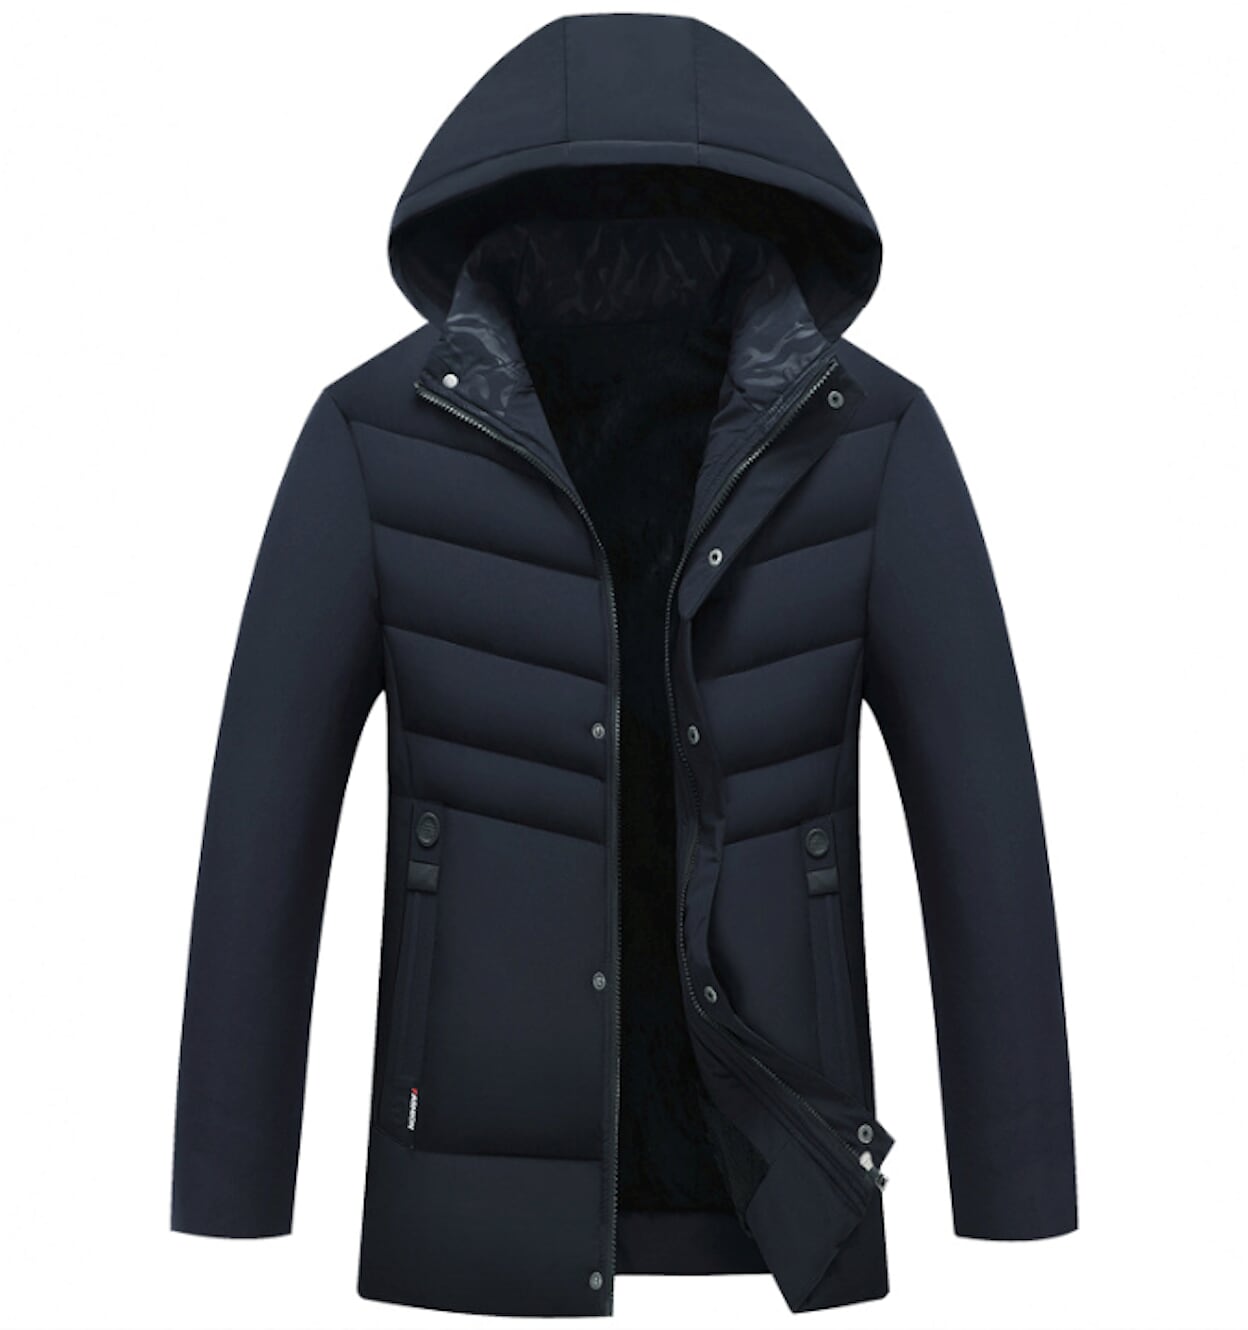 Mens Mid Length Zip Up Jacket with Removable Hood